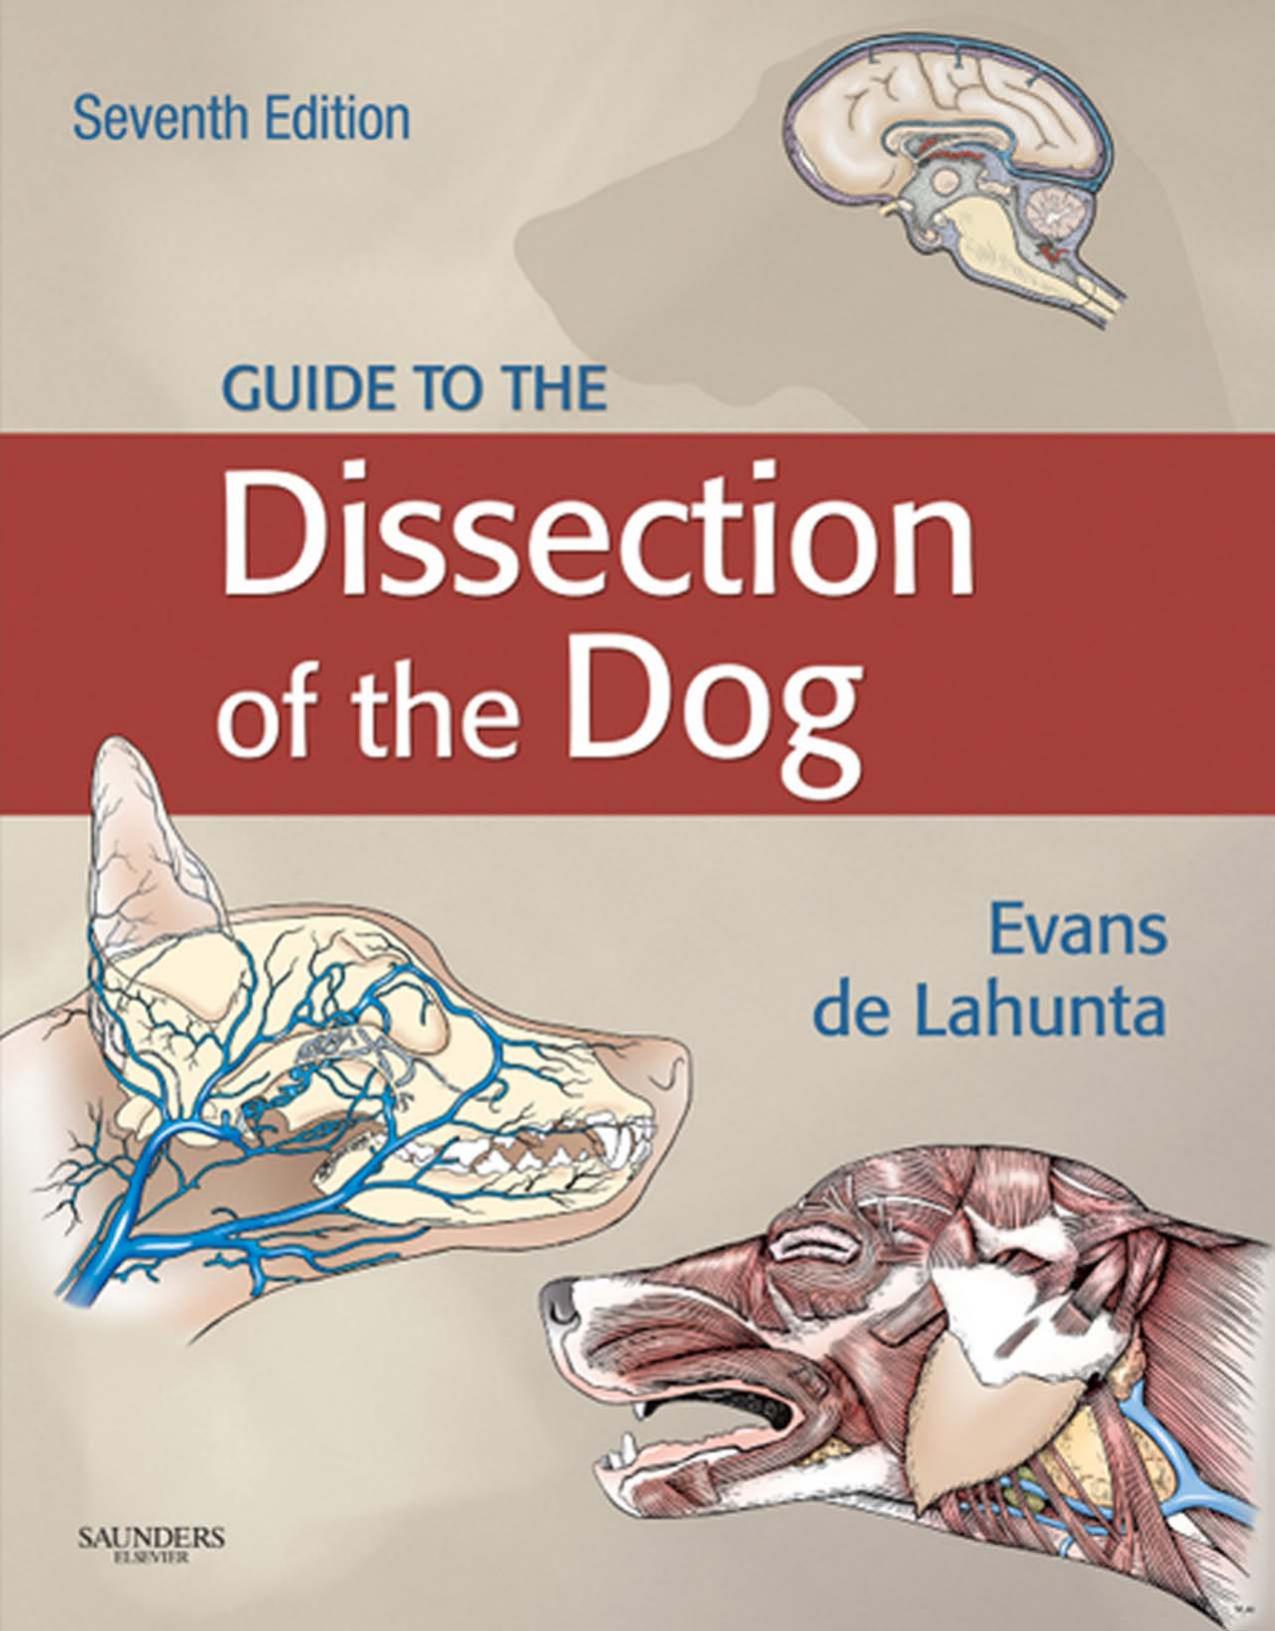 Guide to the Dissection of the Dog, 7th Edition